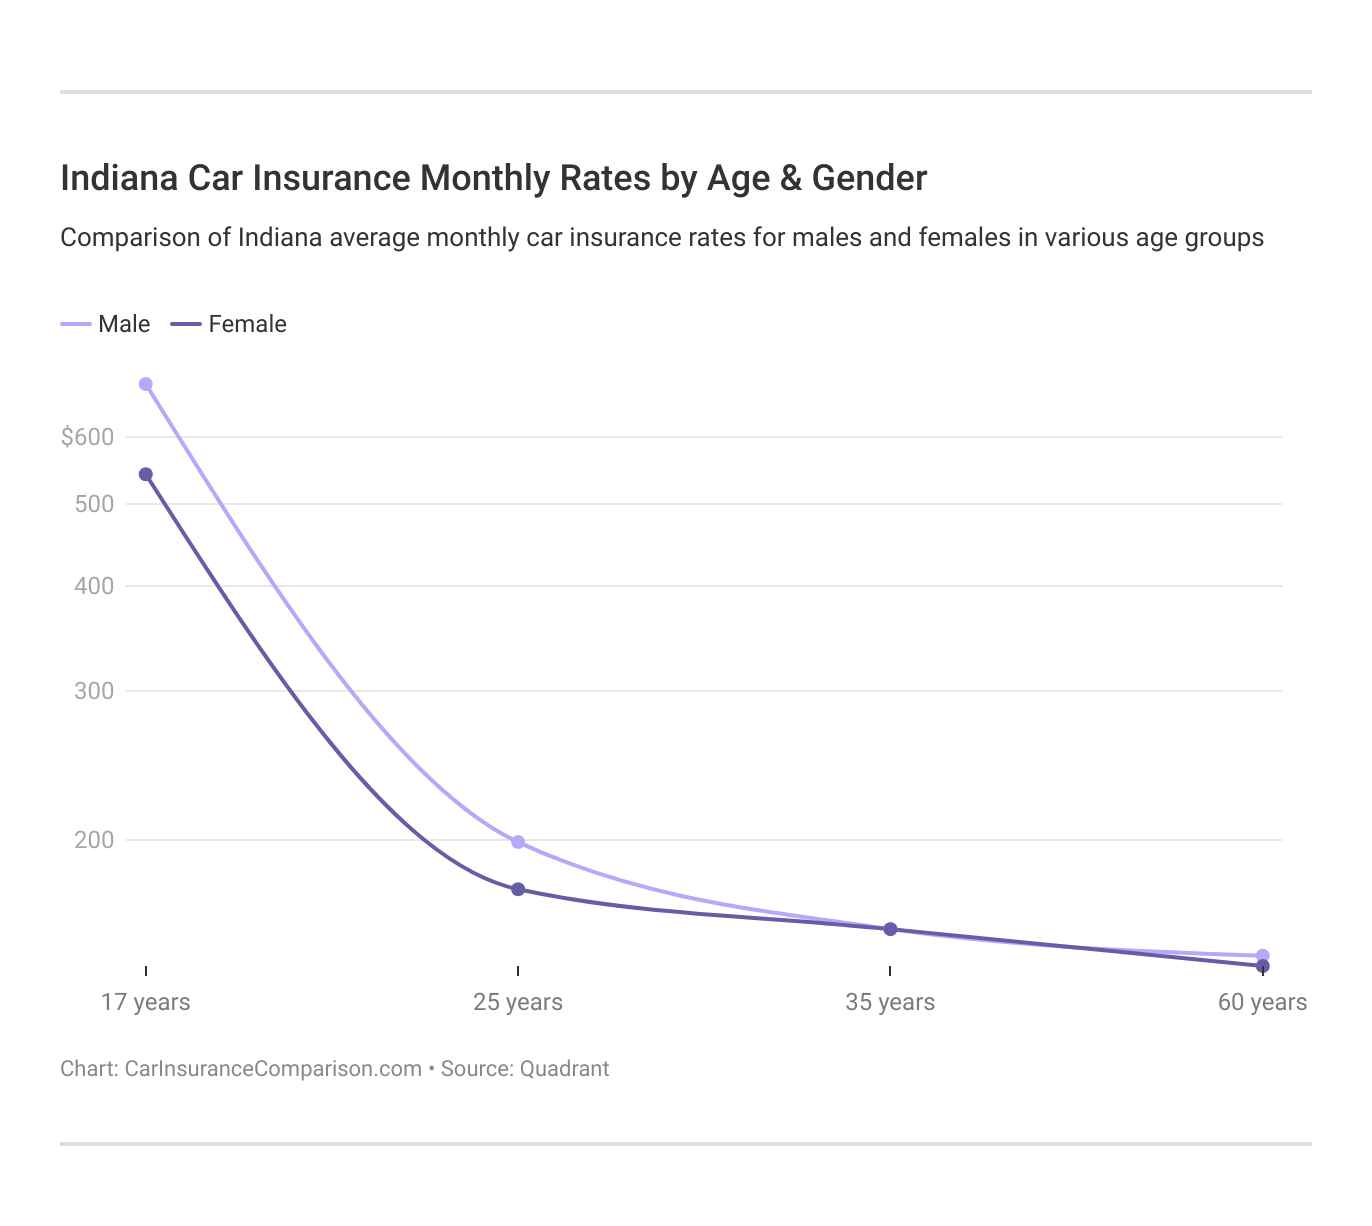 <h3>Indiana Car Insurance Monthly Rates by Age & Gender</h3>